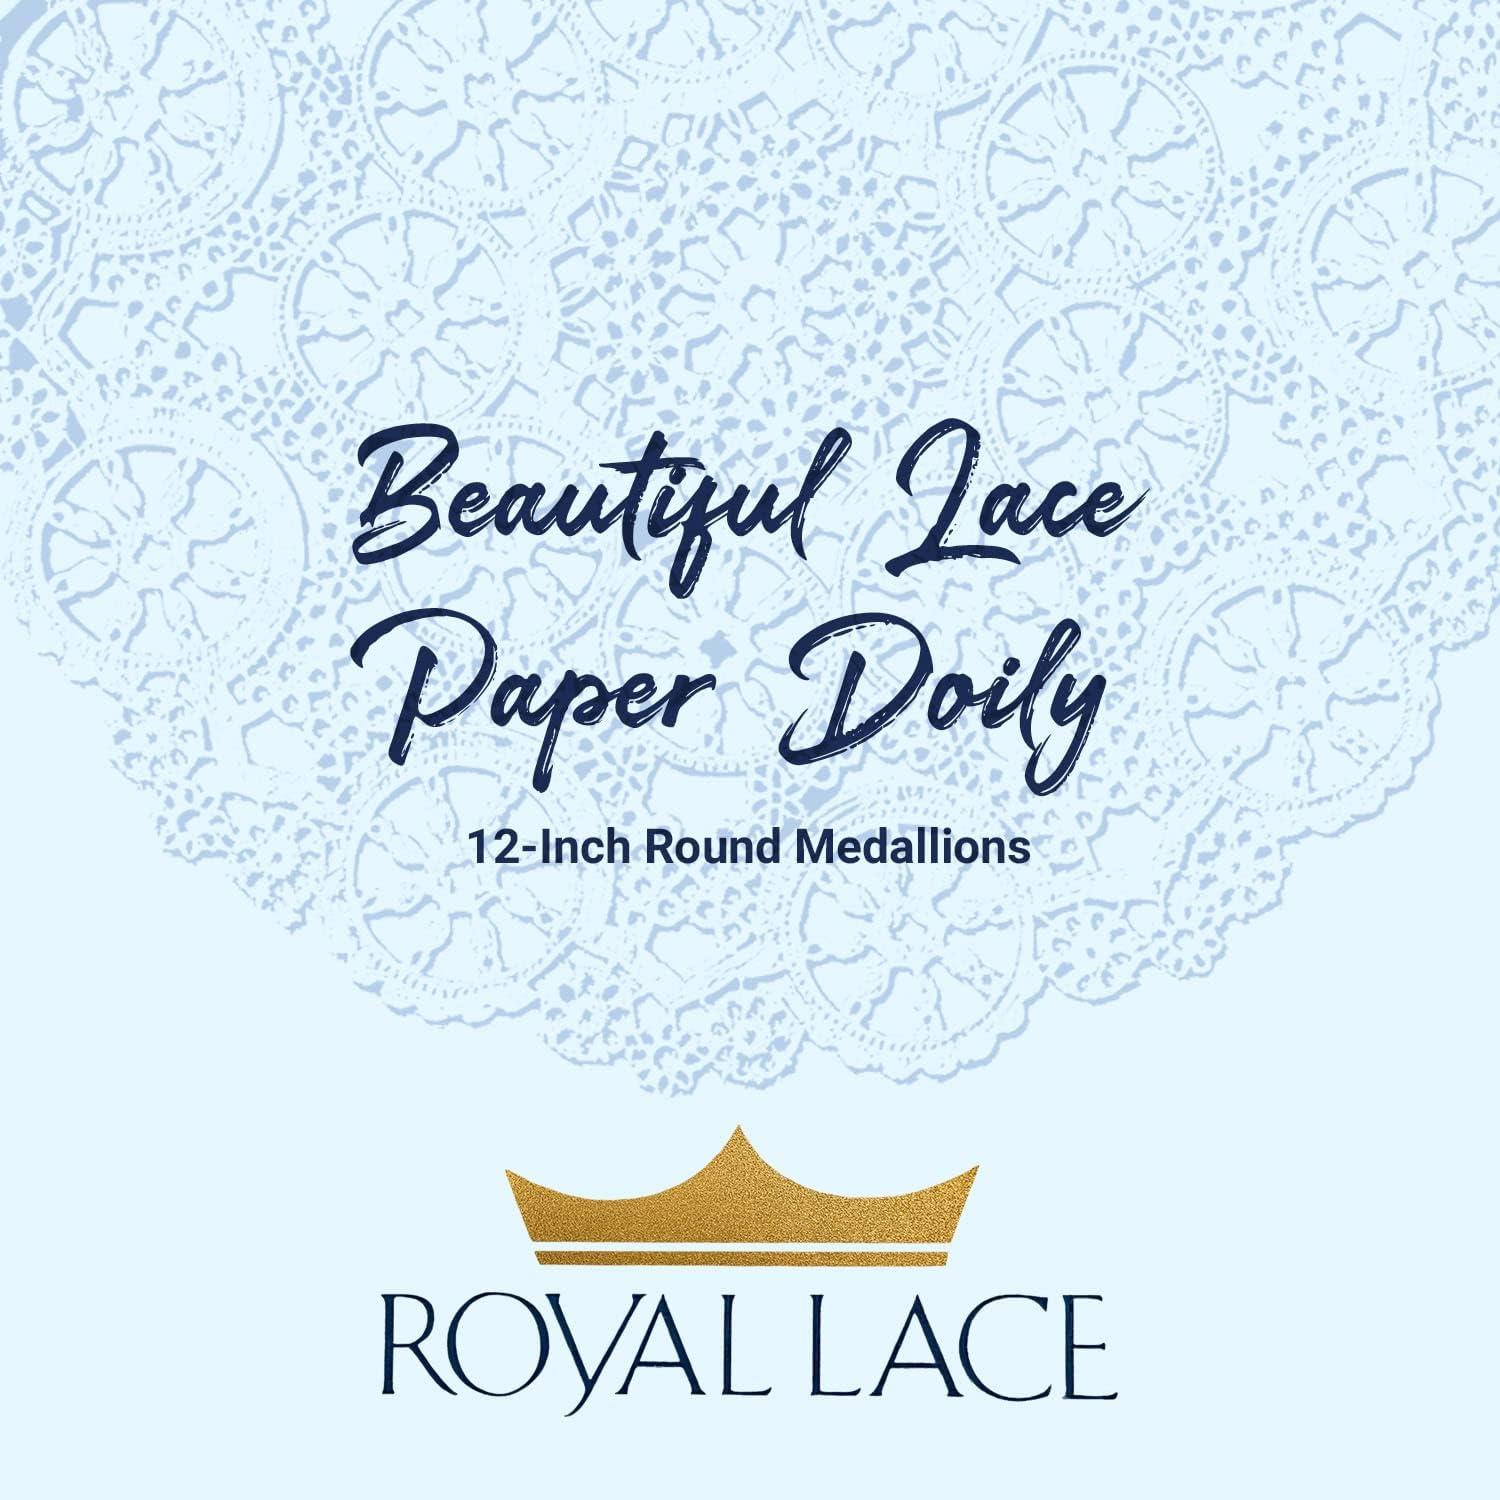 Paper Lace Doilies 12 inches